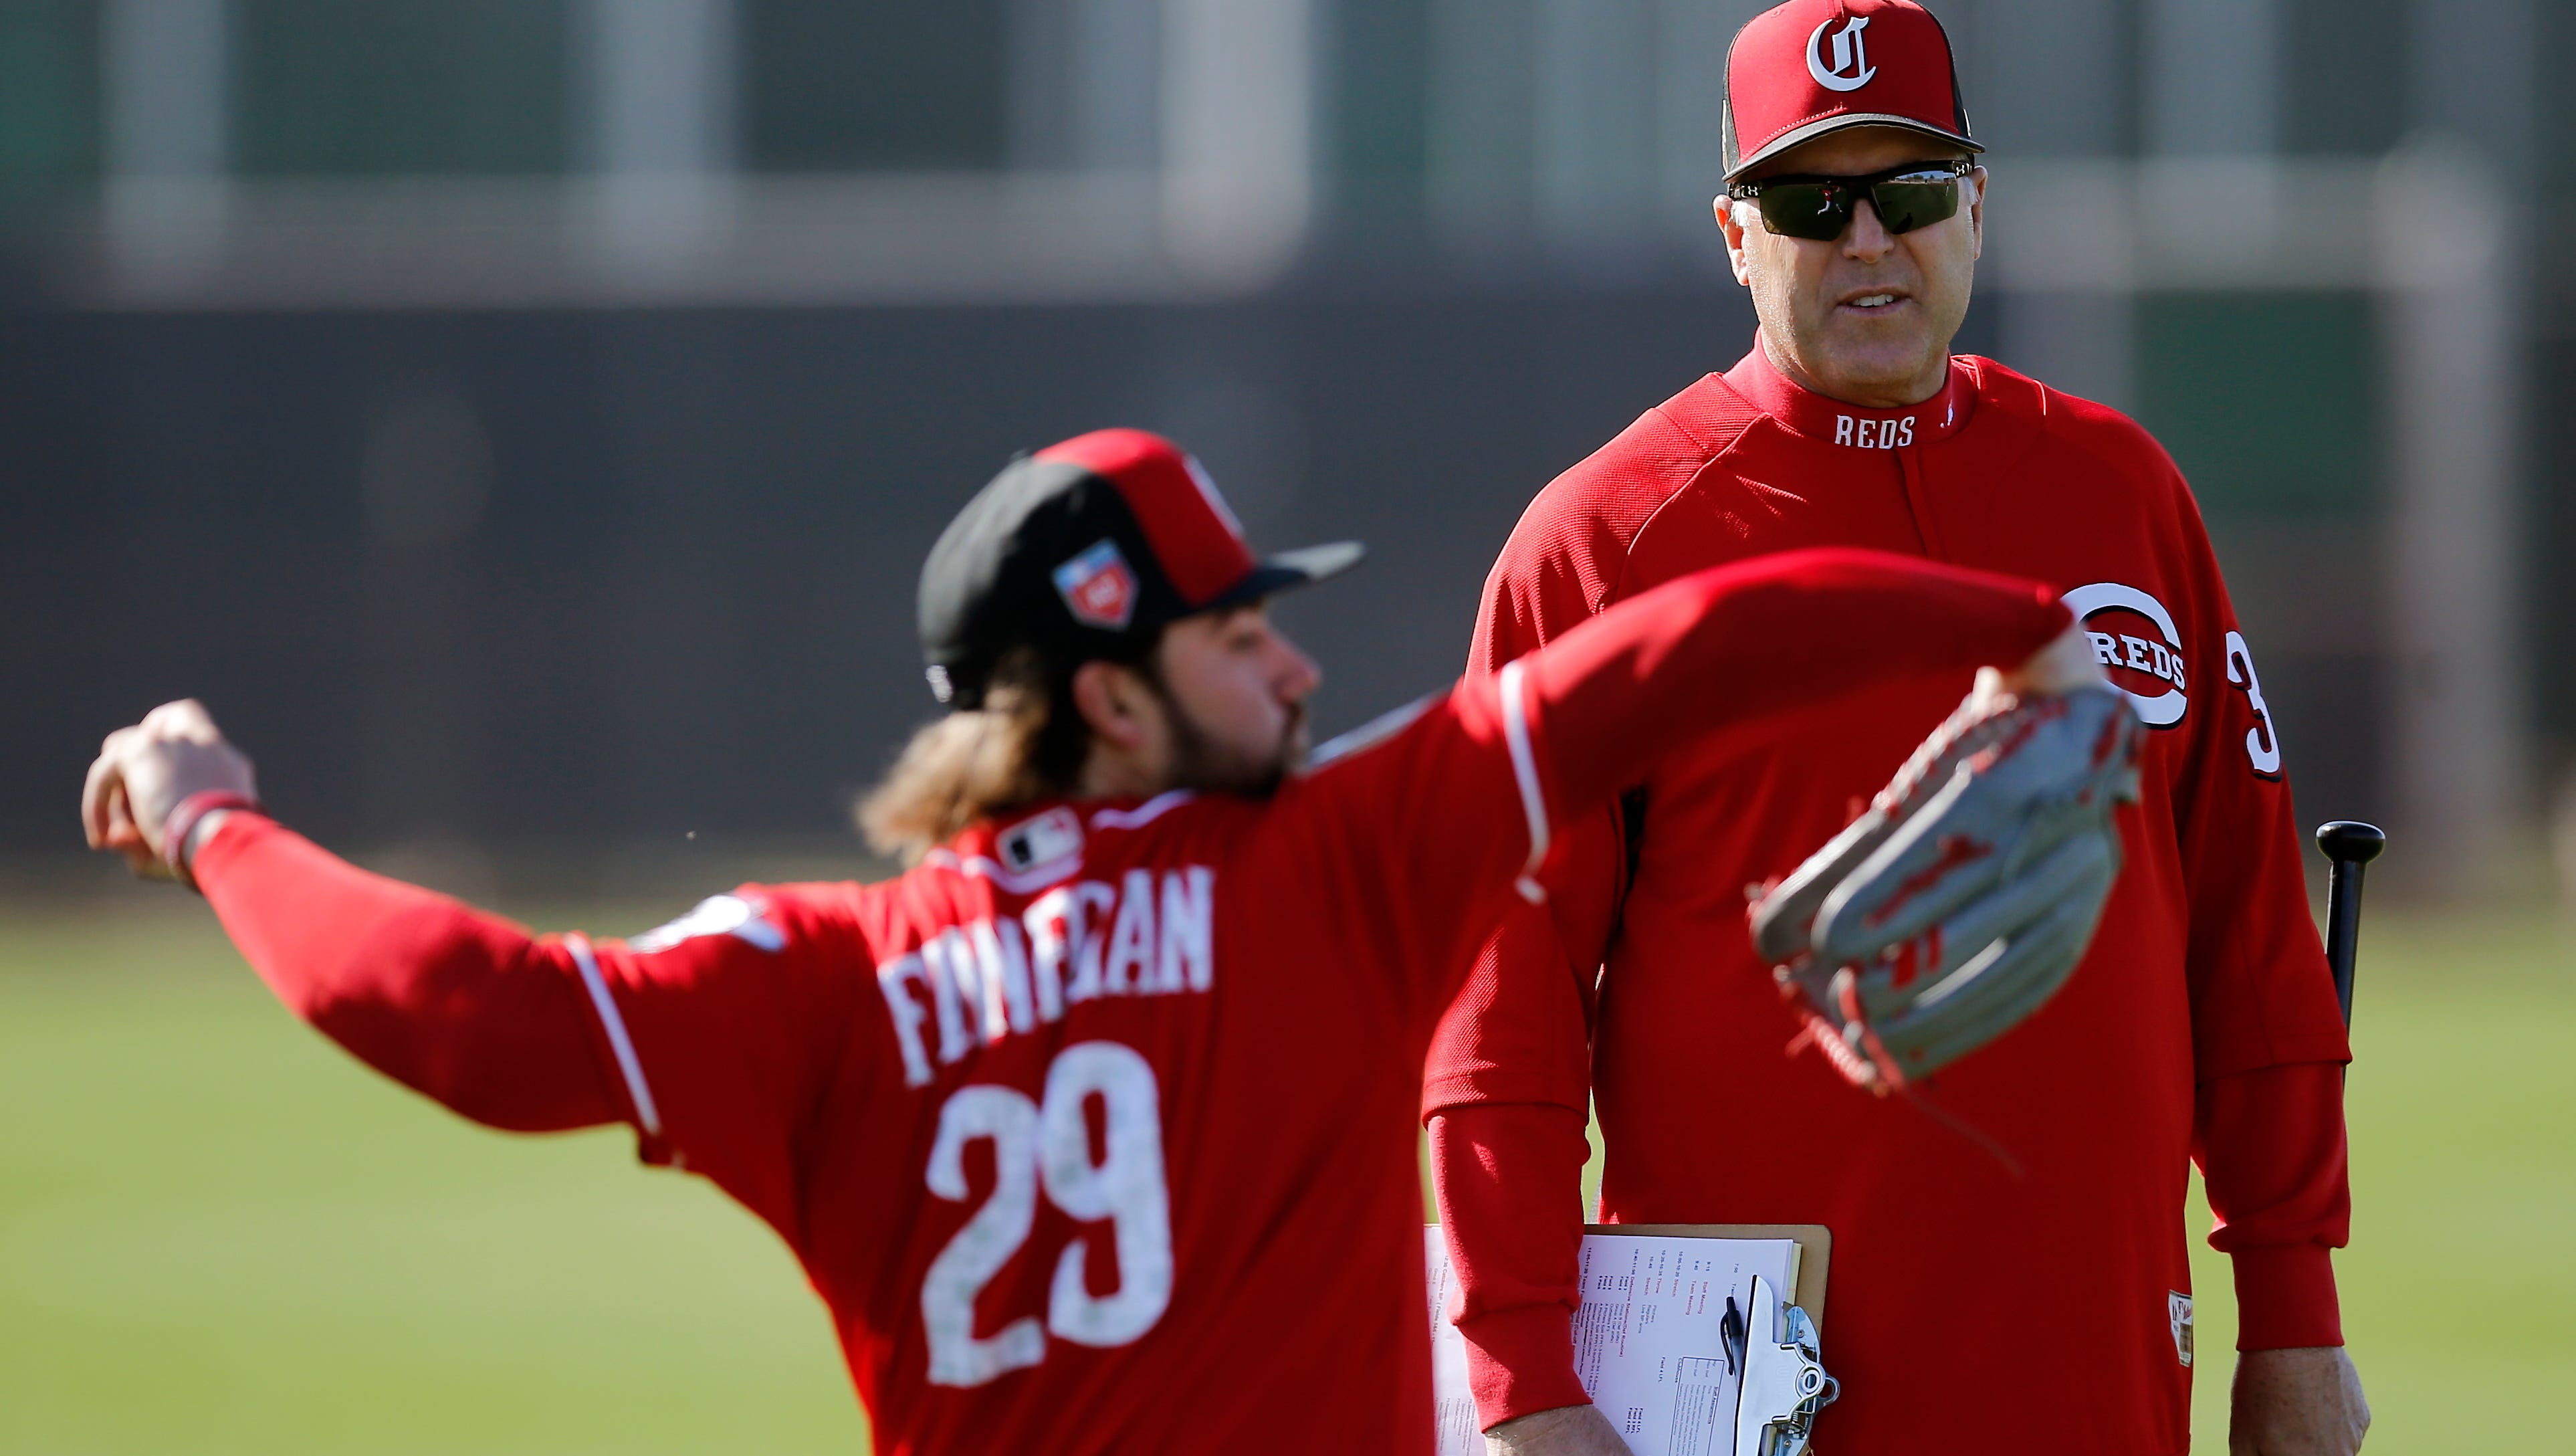 Reds Bryan Price Sees Brandon Finnegan As A Starter Right Now